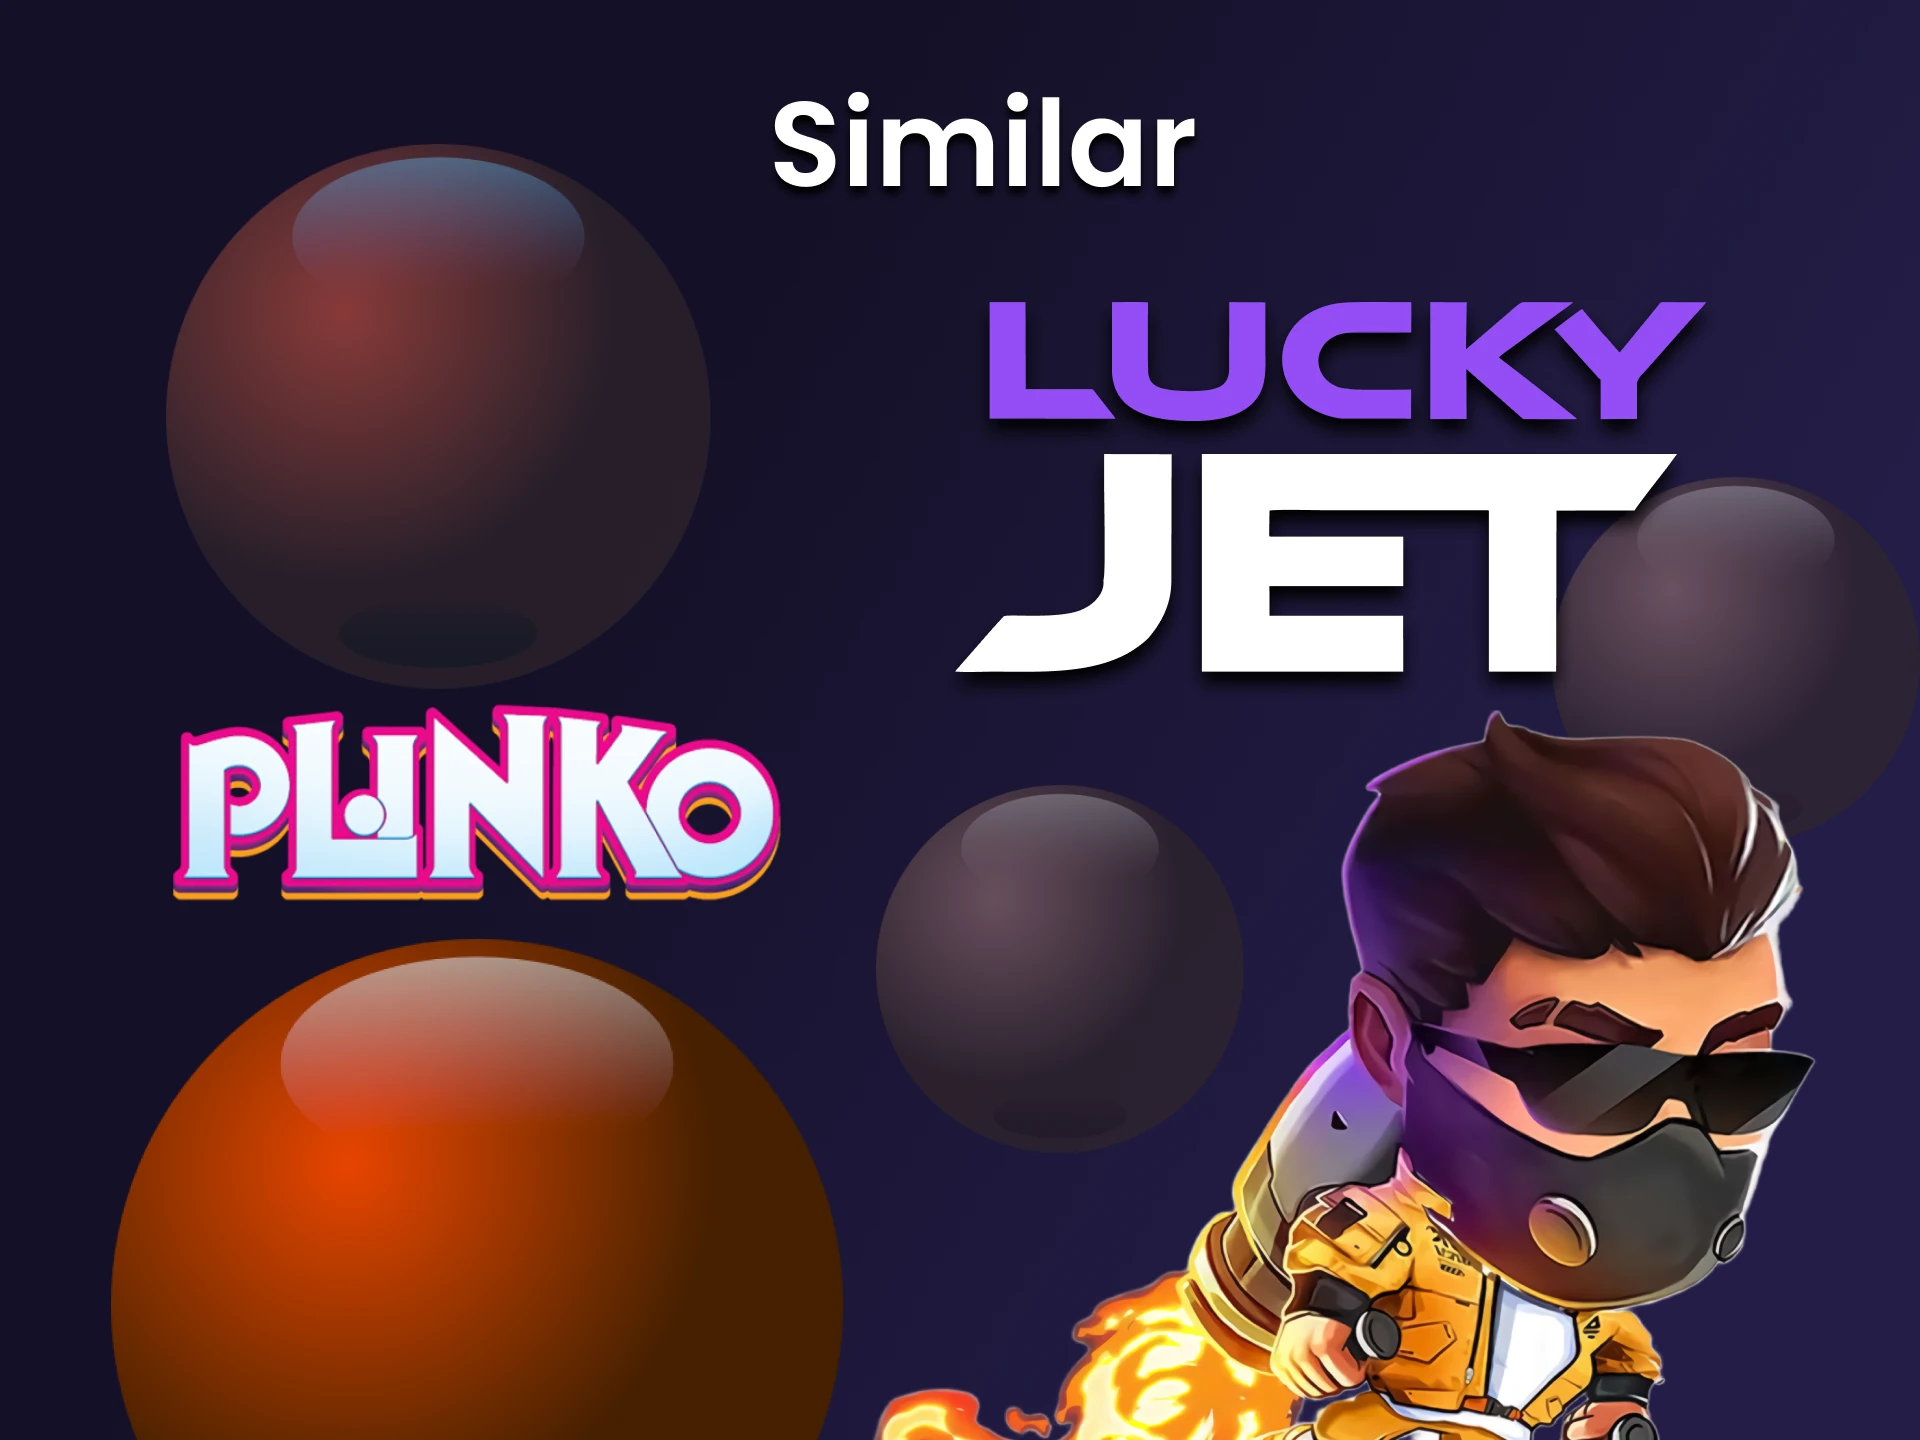 We will tell you how Plinko and Lucky Jet are similar.